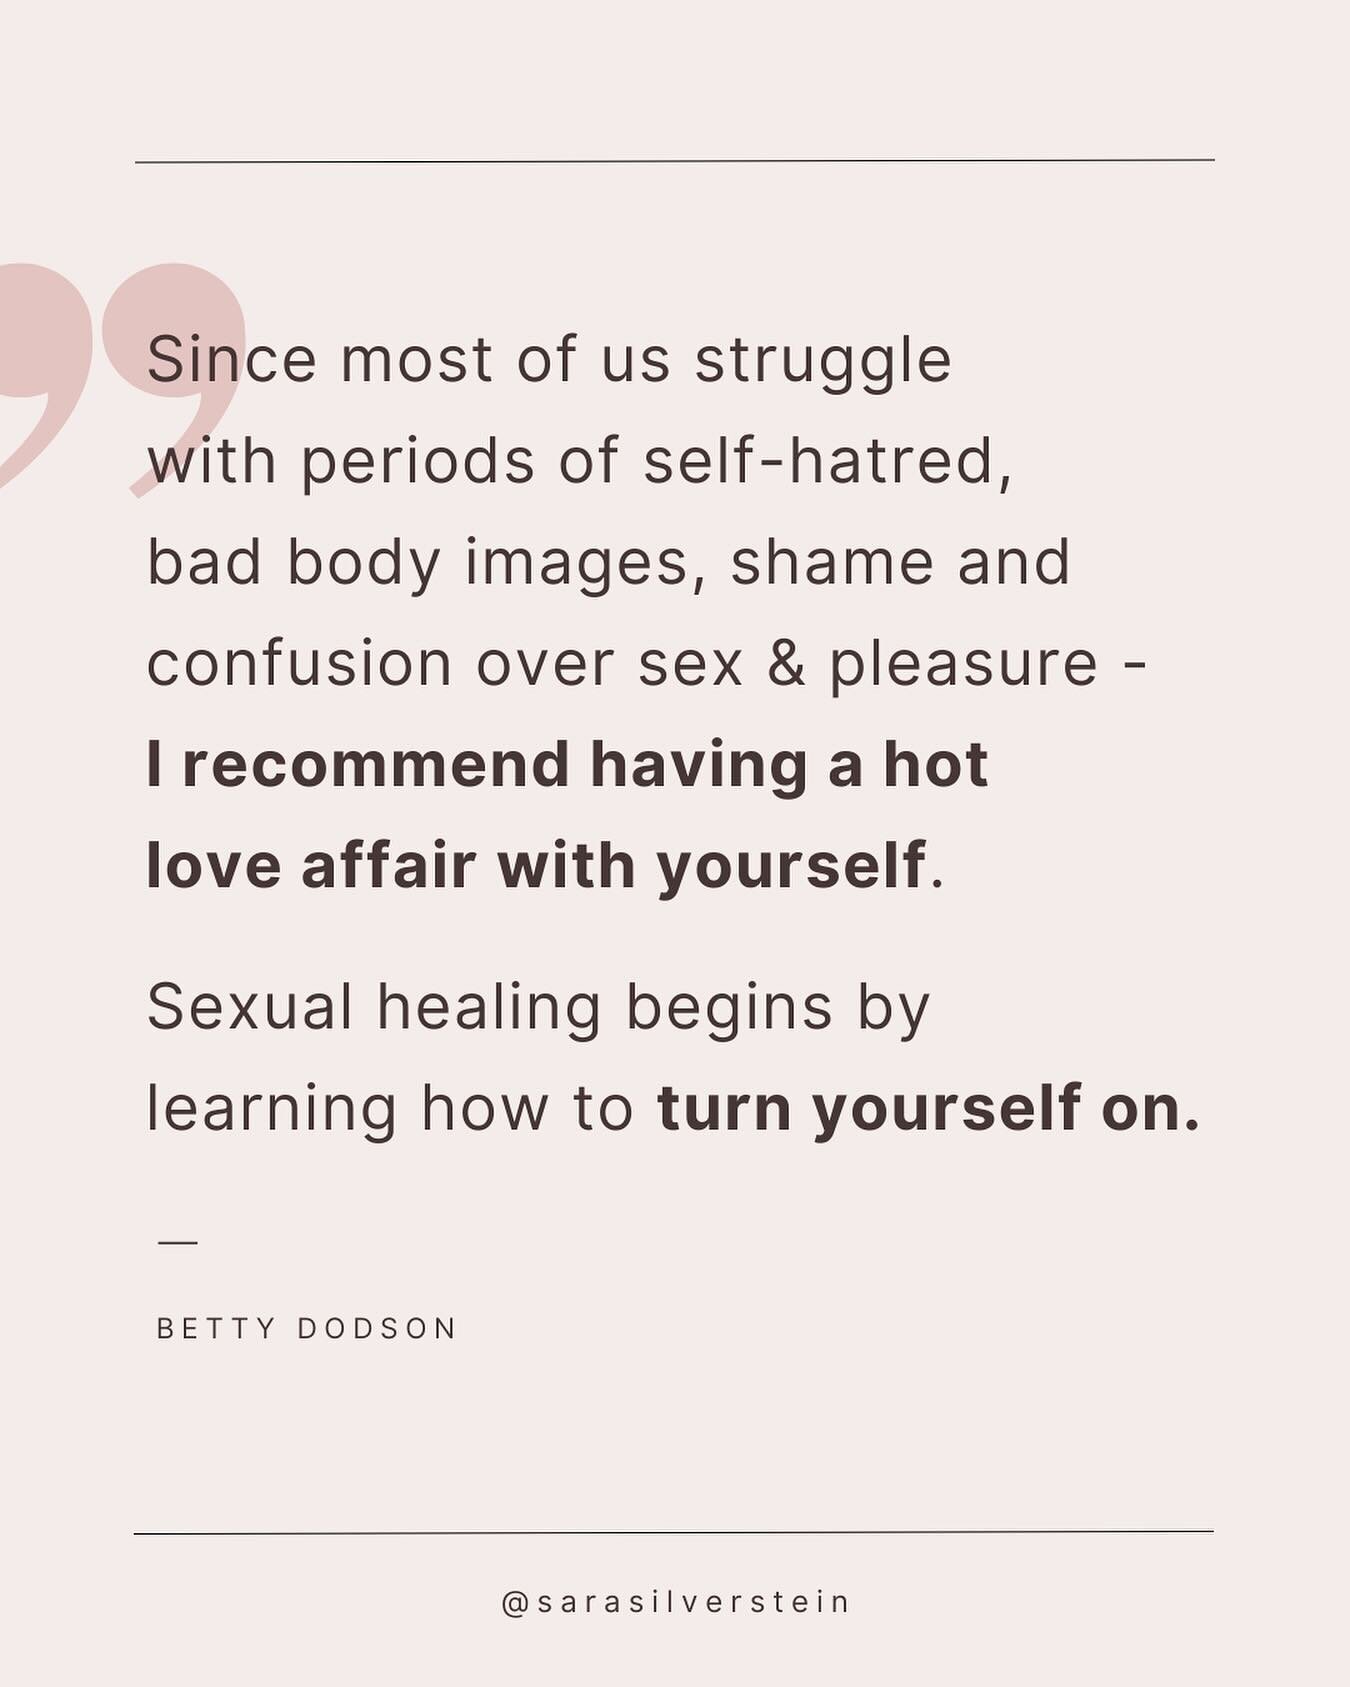 I am the kind of gal who scribbles in books. 
I underline, cross out and dog ear pages to go back to.

I figure as I step deeper into the realm of an Intimacy Educator - it is time to share more quotes written by women and vulva havers on our sensual